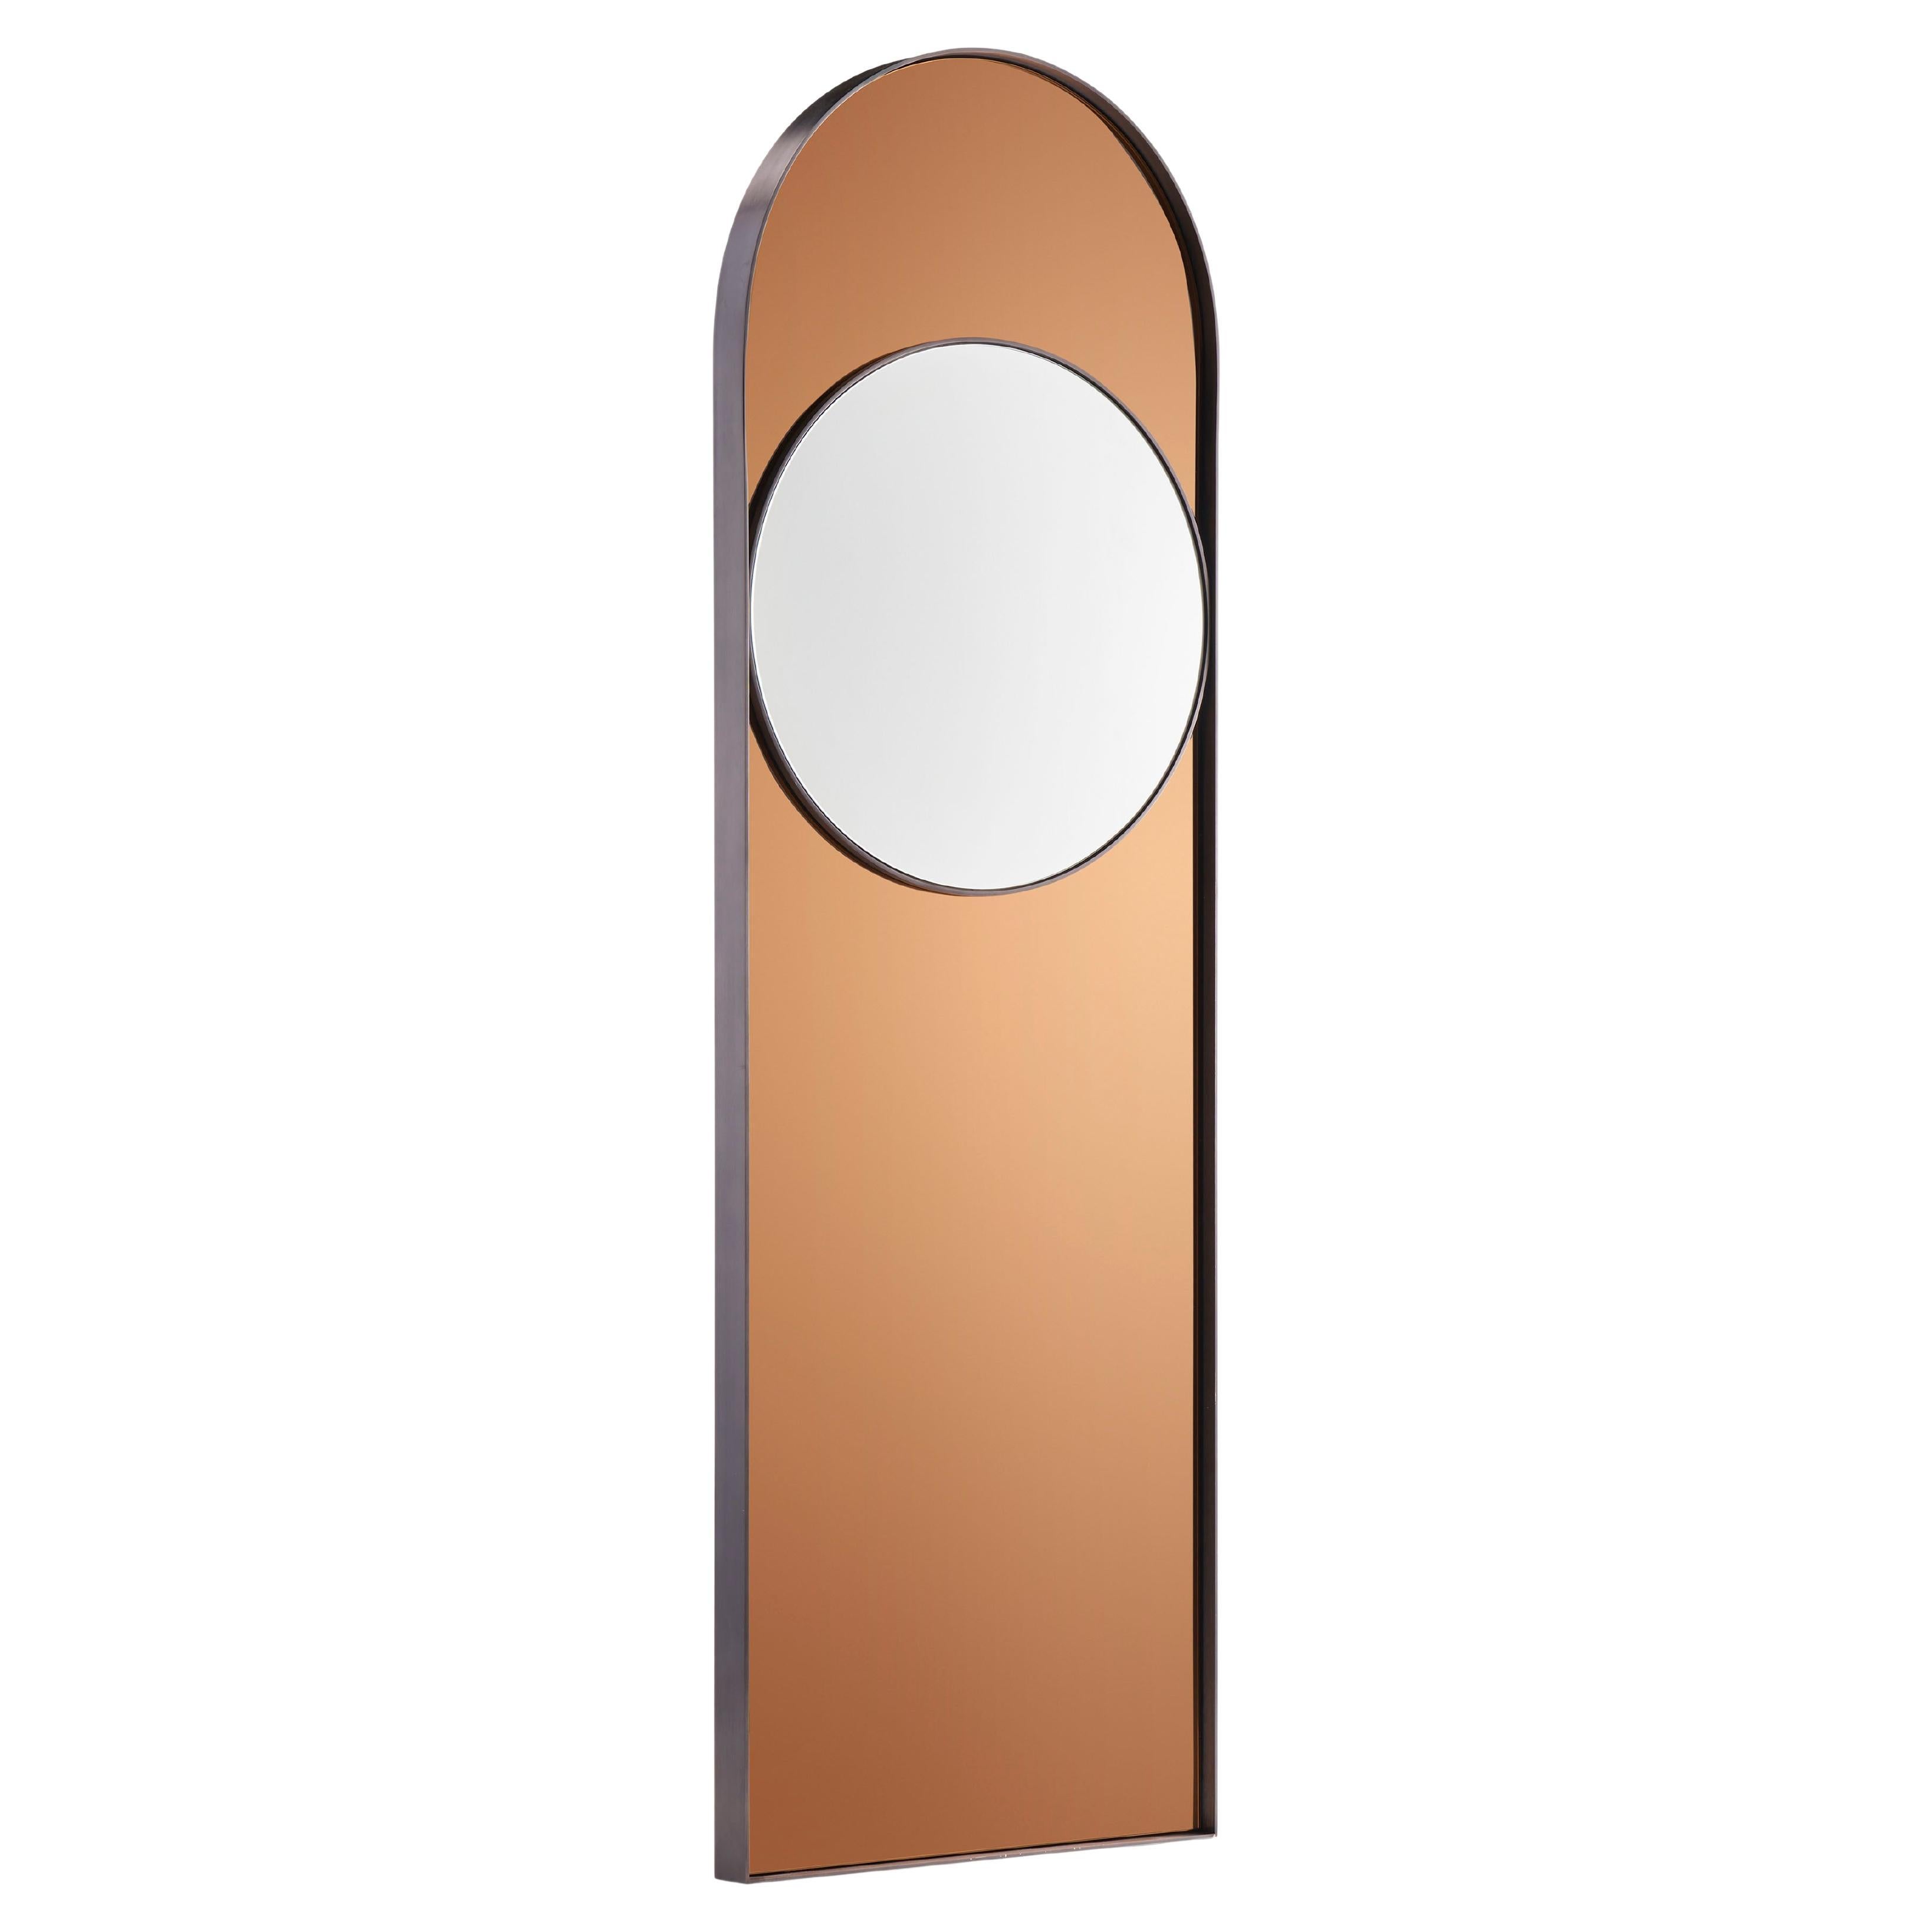 Ovo Arc Mirror, Clear Mirror Inset onto a Colored Glass Background For Sale